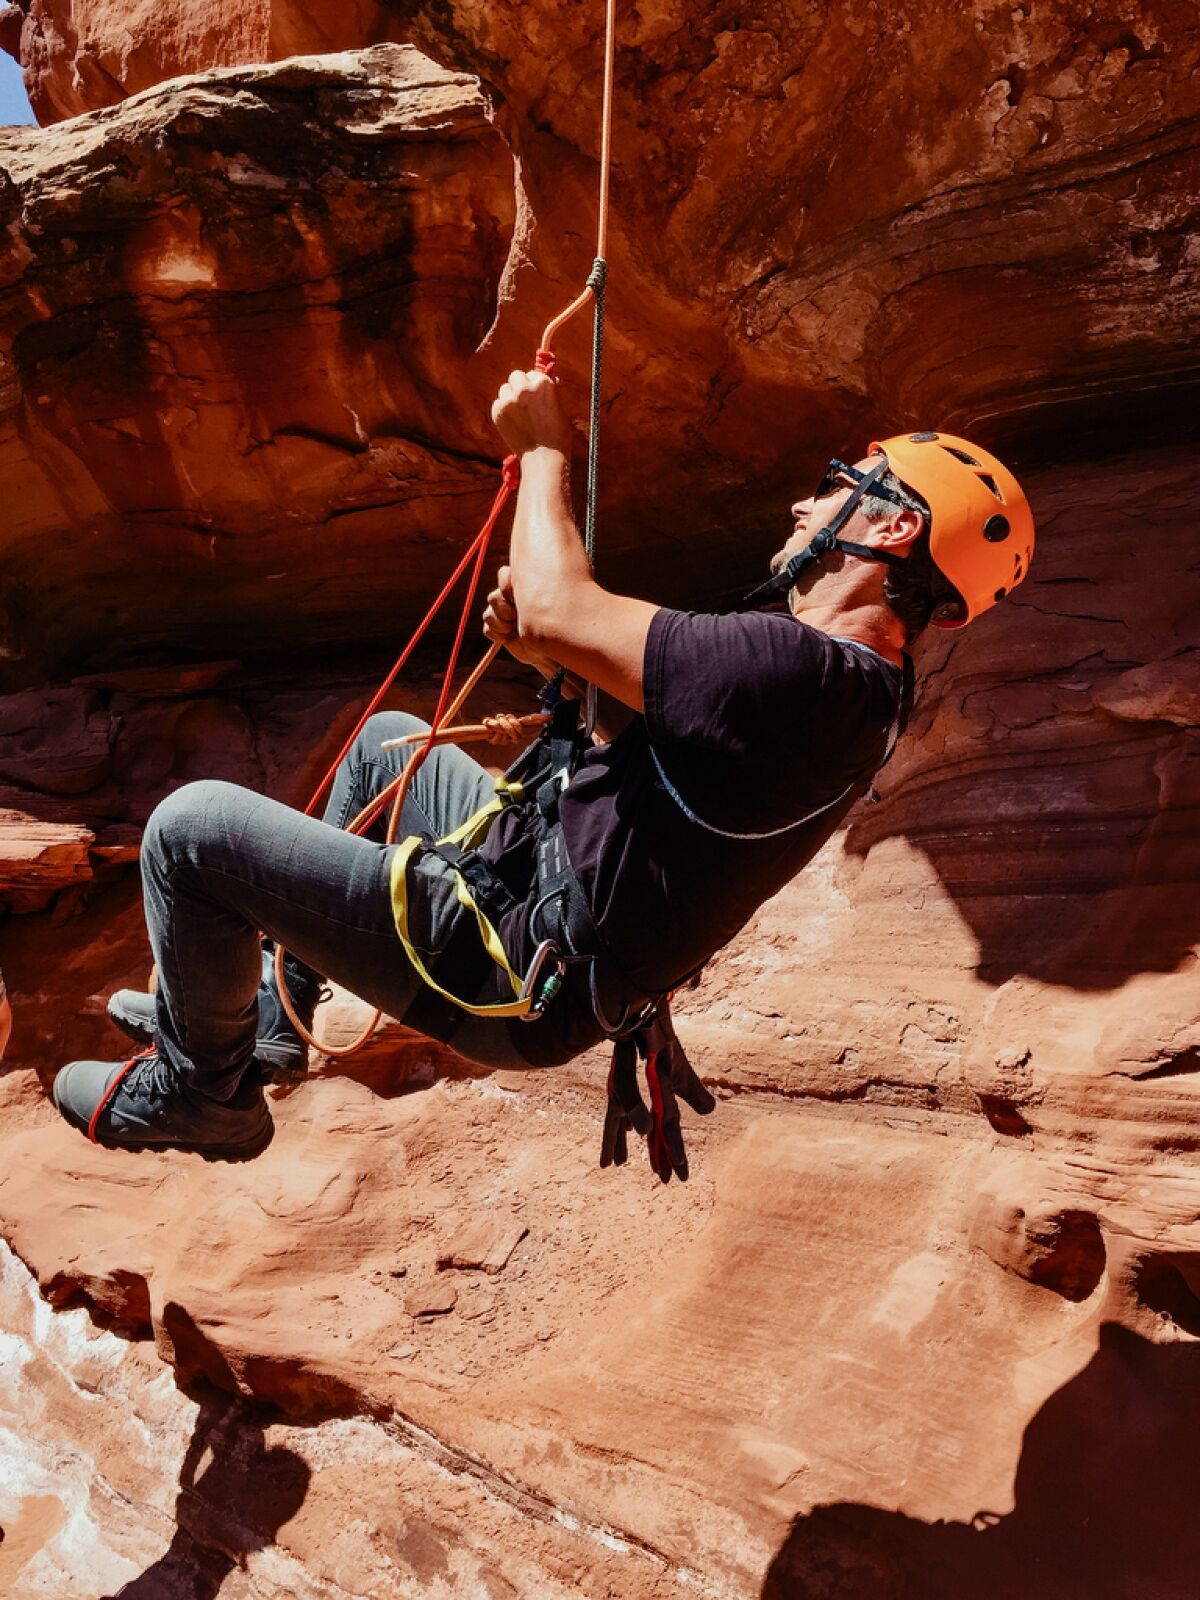 A man hangs from a rope under a rocky ledge